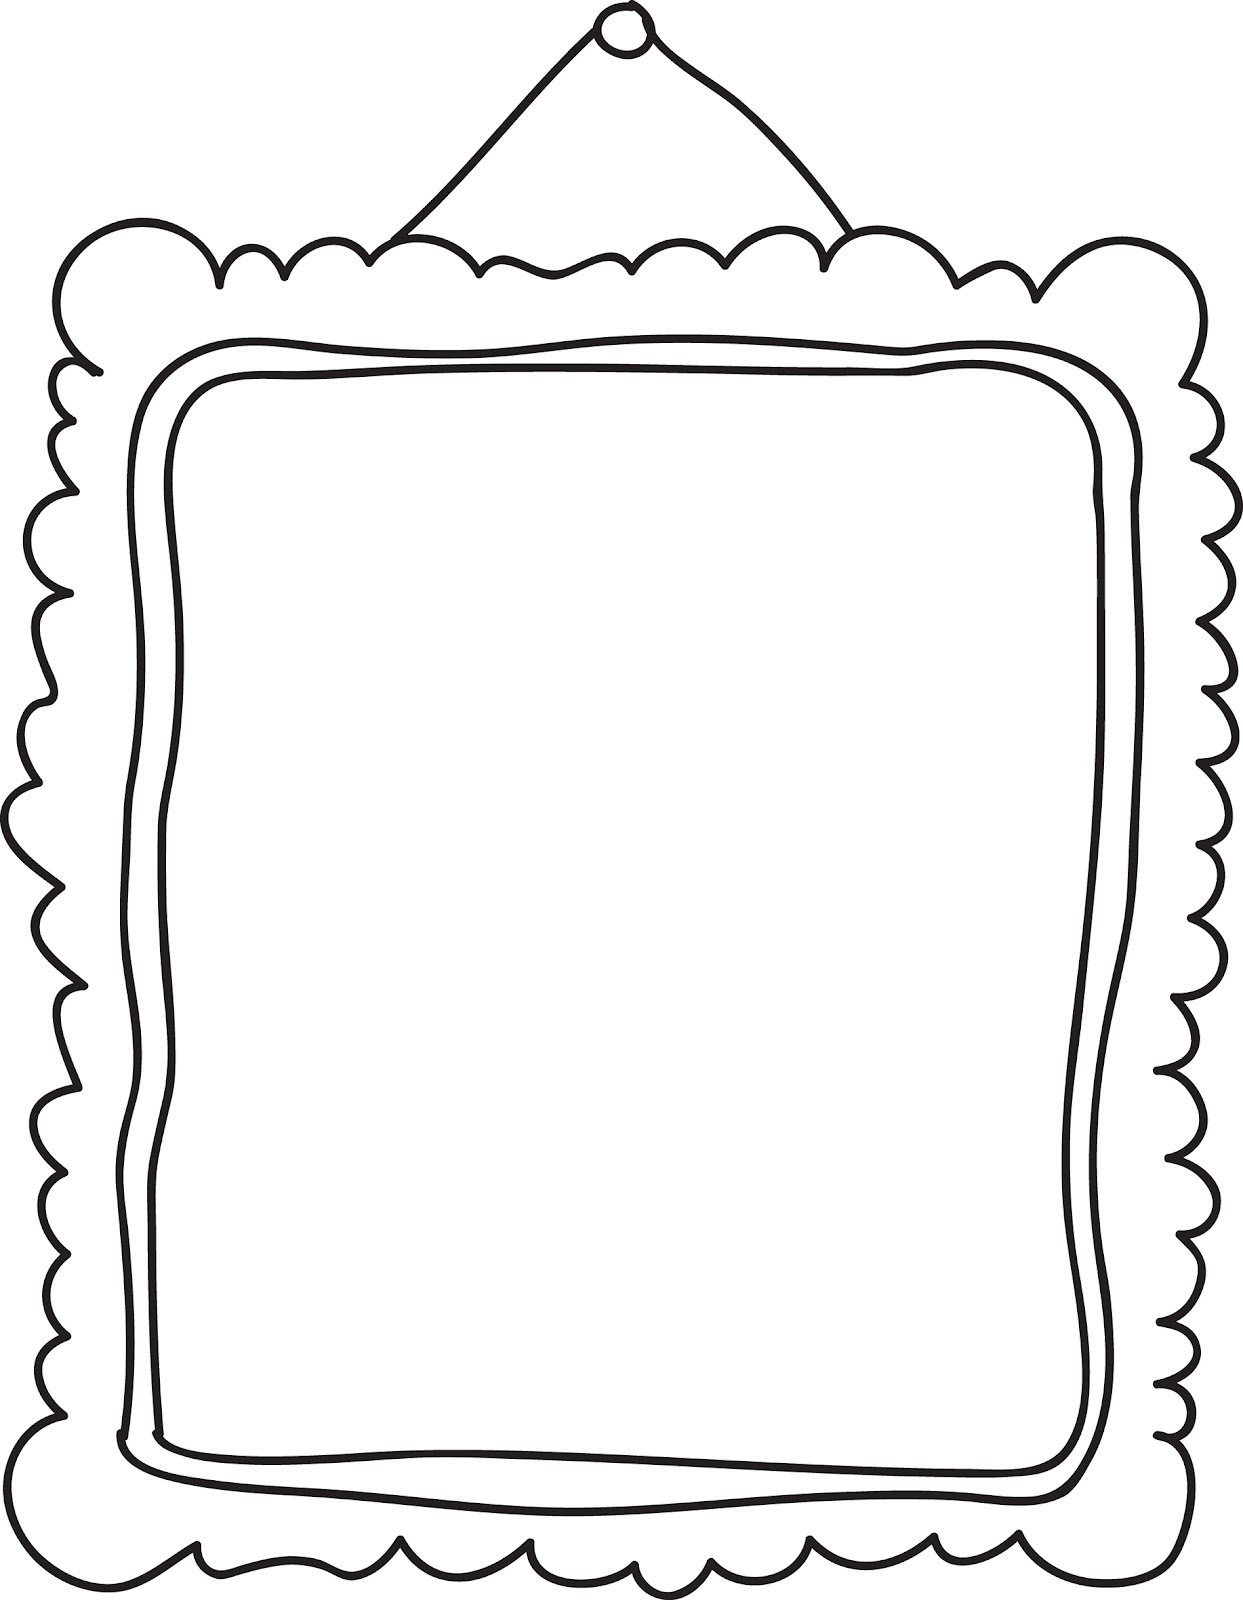 Black picture frame clipart